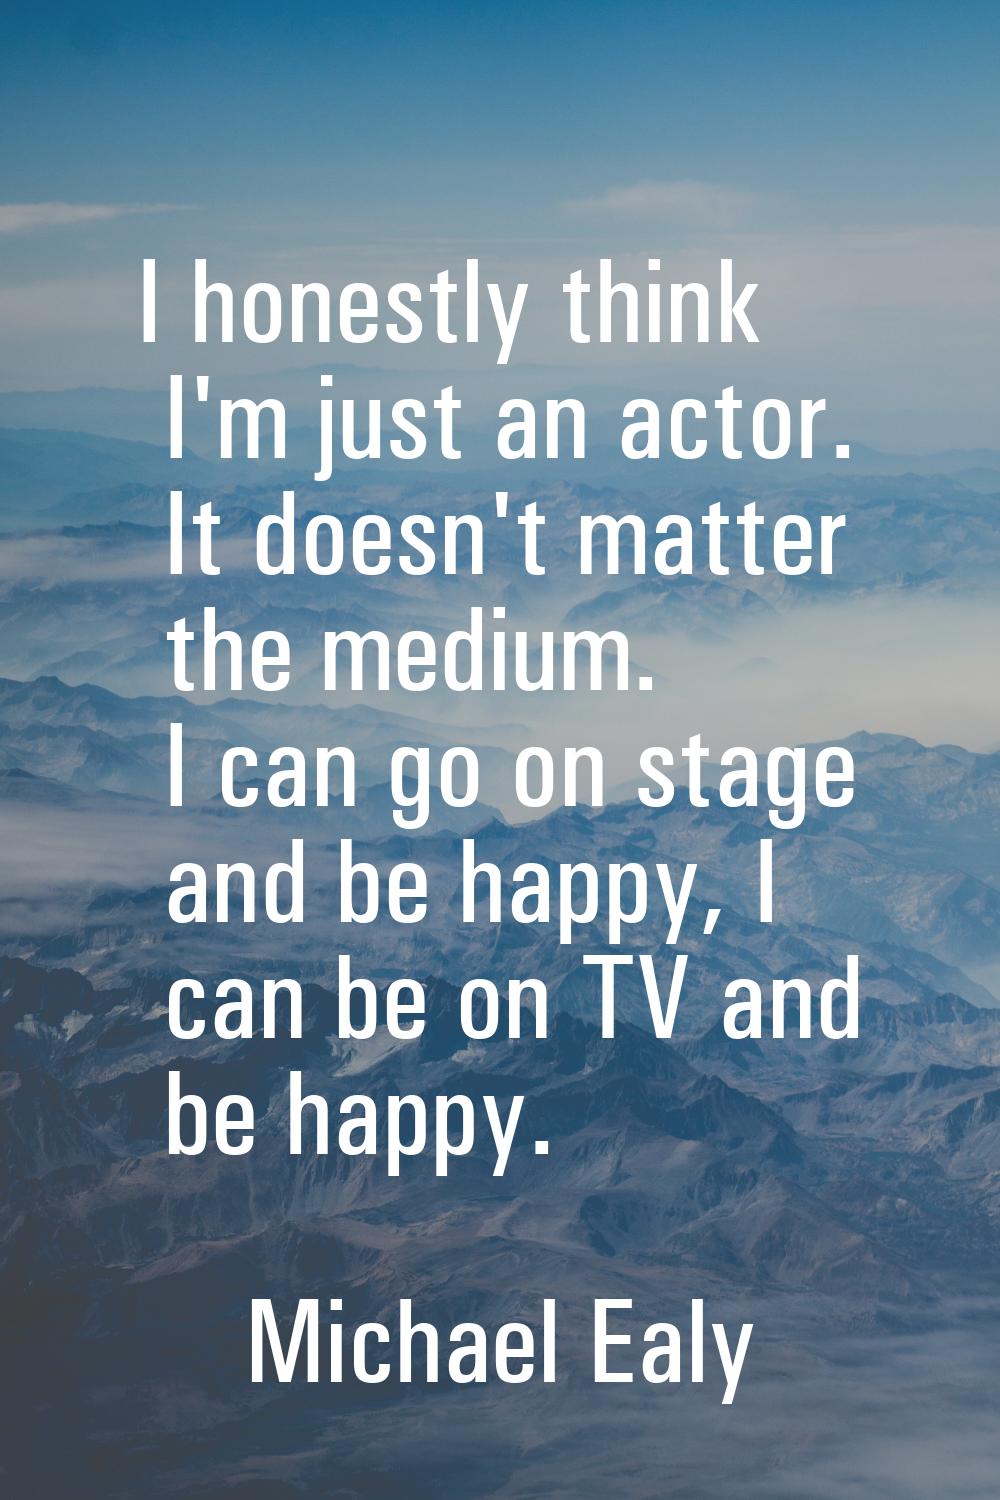 I honestly think I'm just an actor. It doesn't matter the medium. I can go on stage and be happy, I